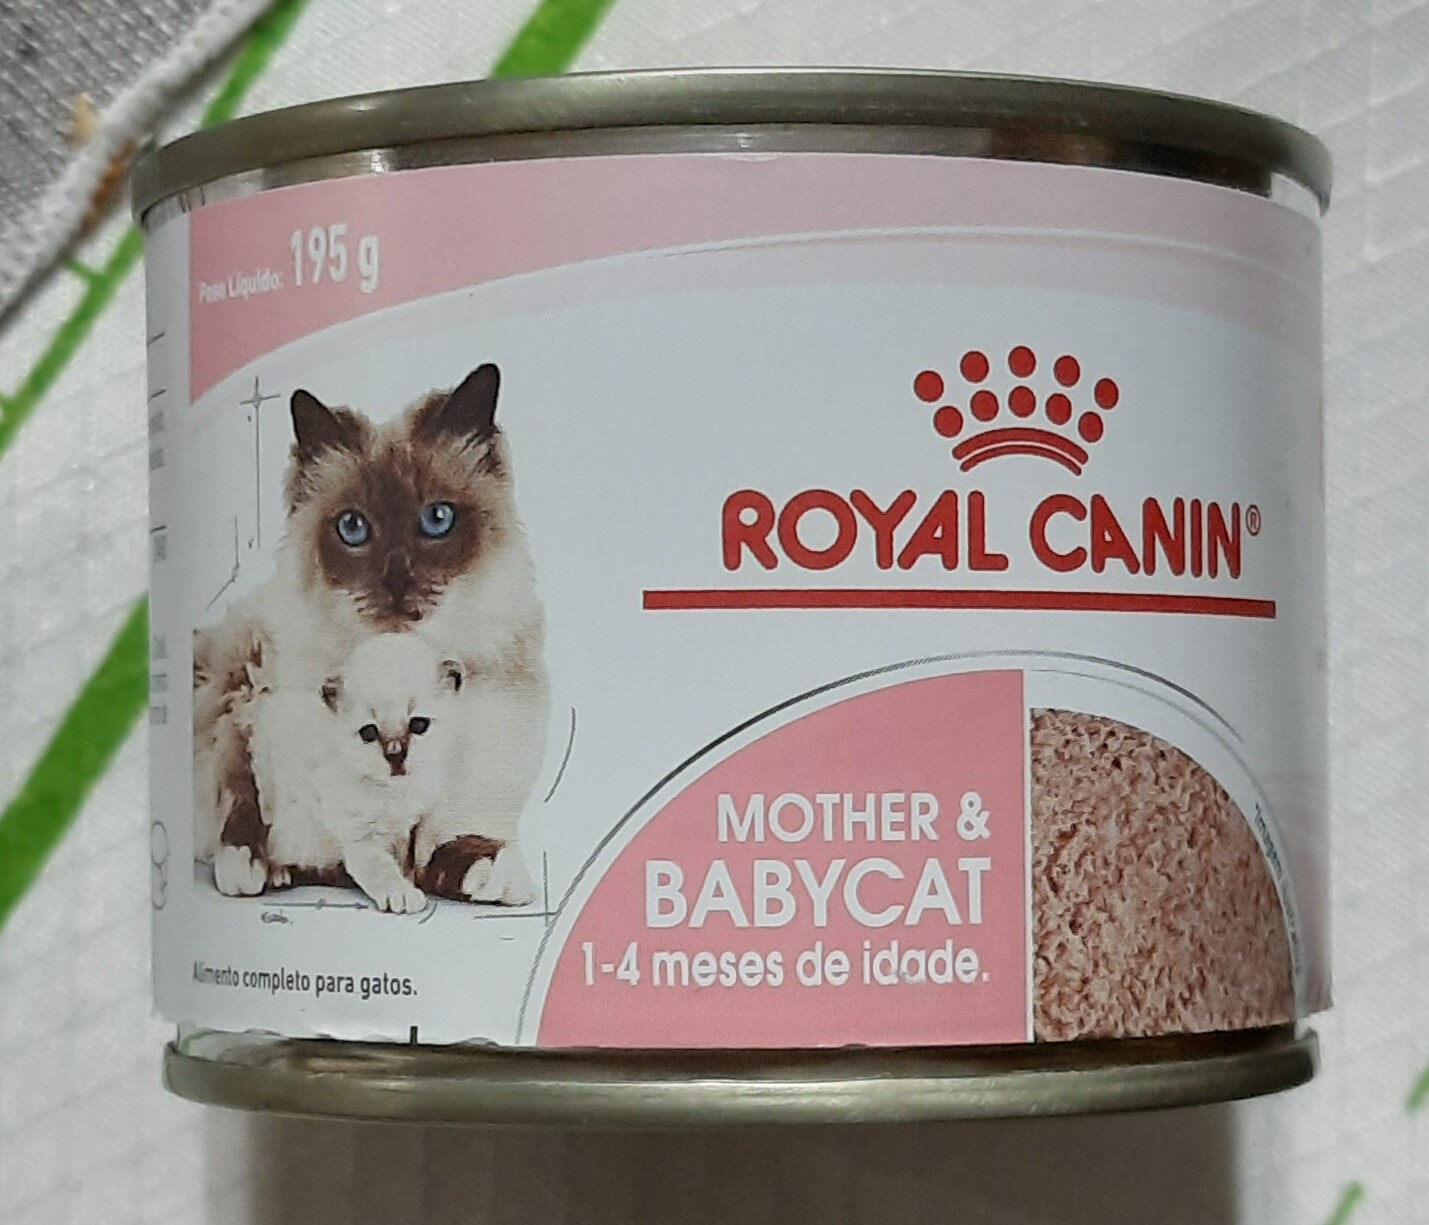 Mother & Babycat - Product - pt